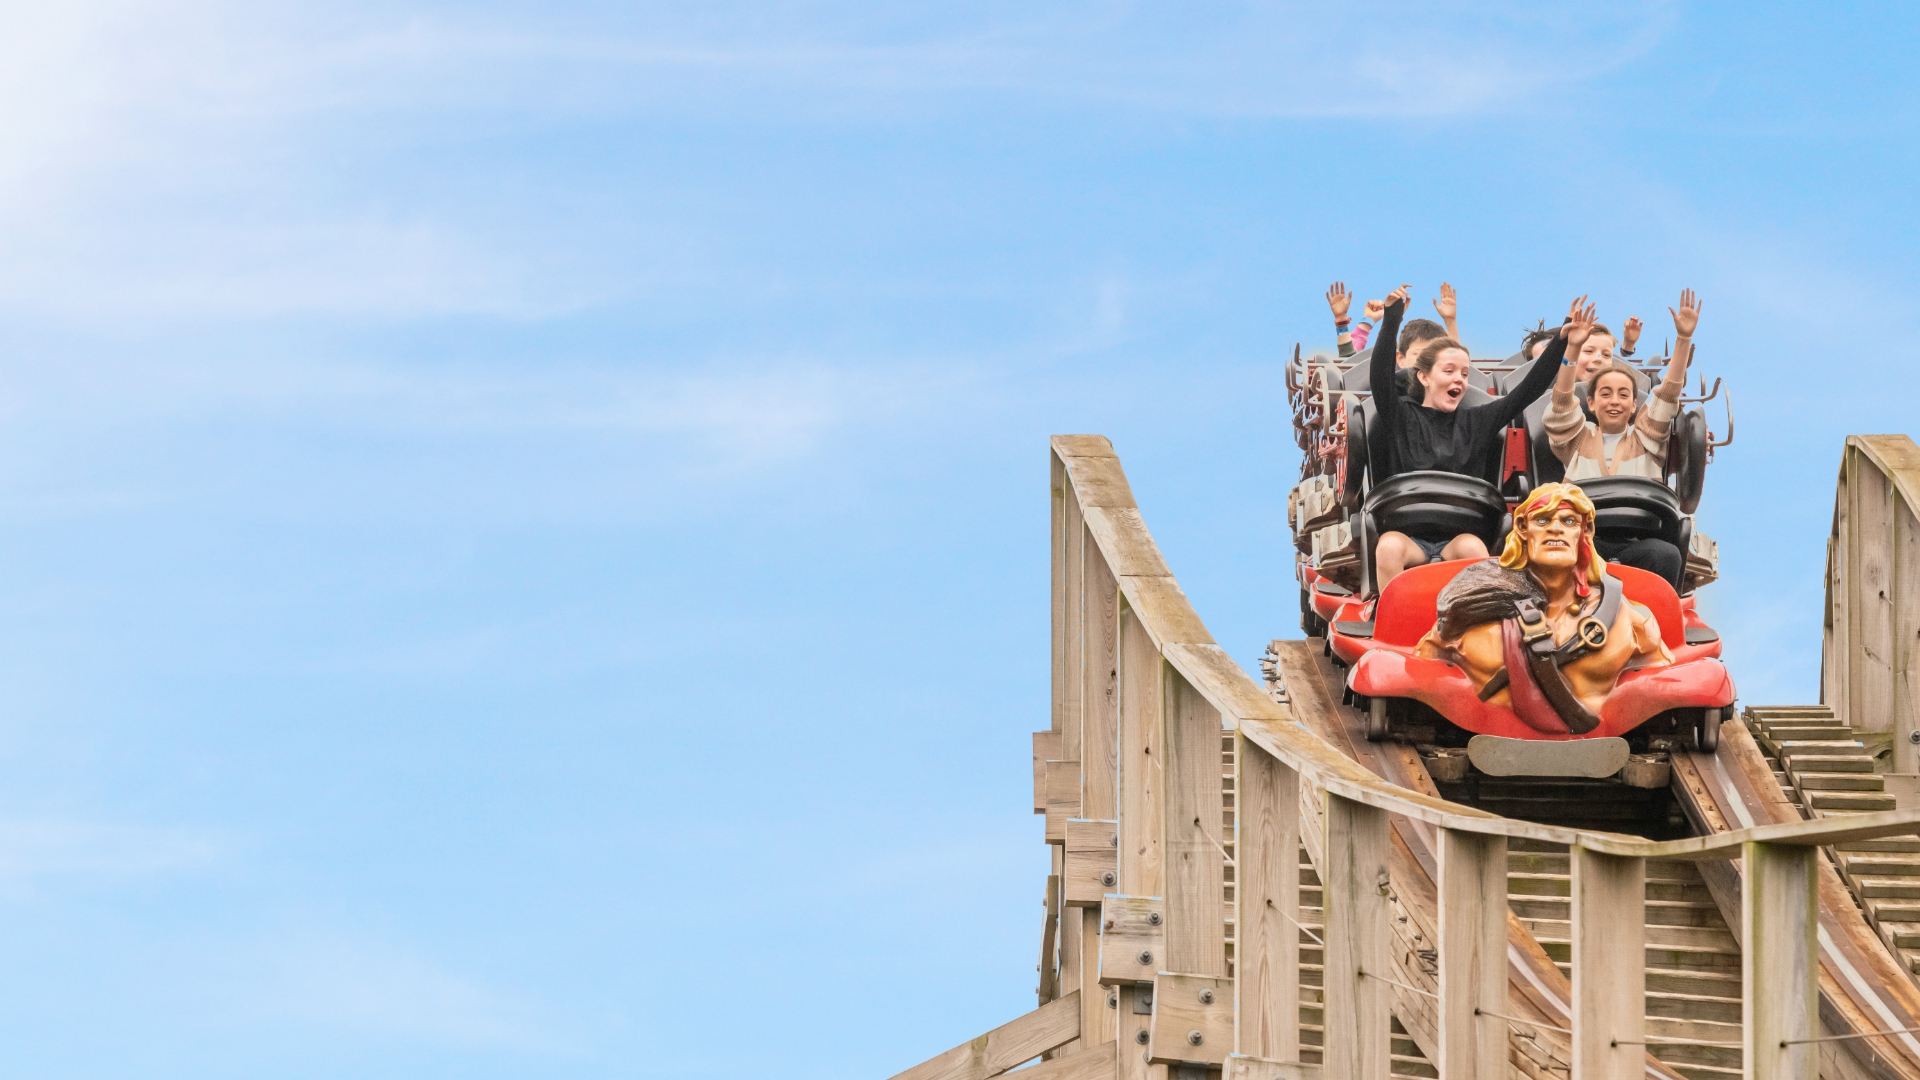 With their arms up, children are having fun while riding the Cu Chulainn at emerald park